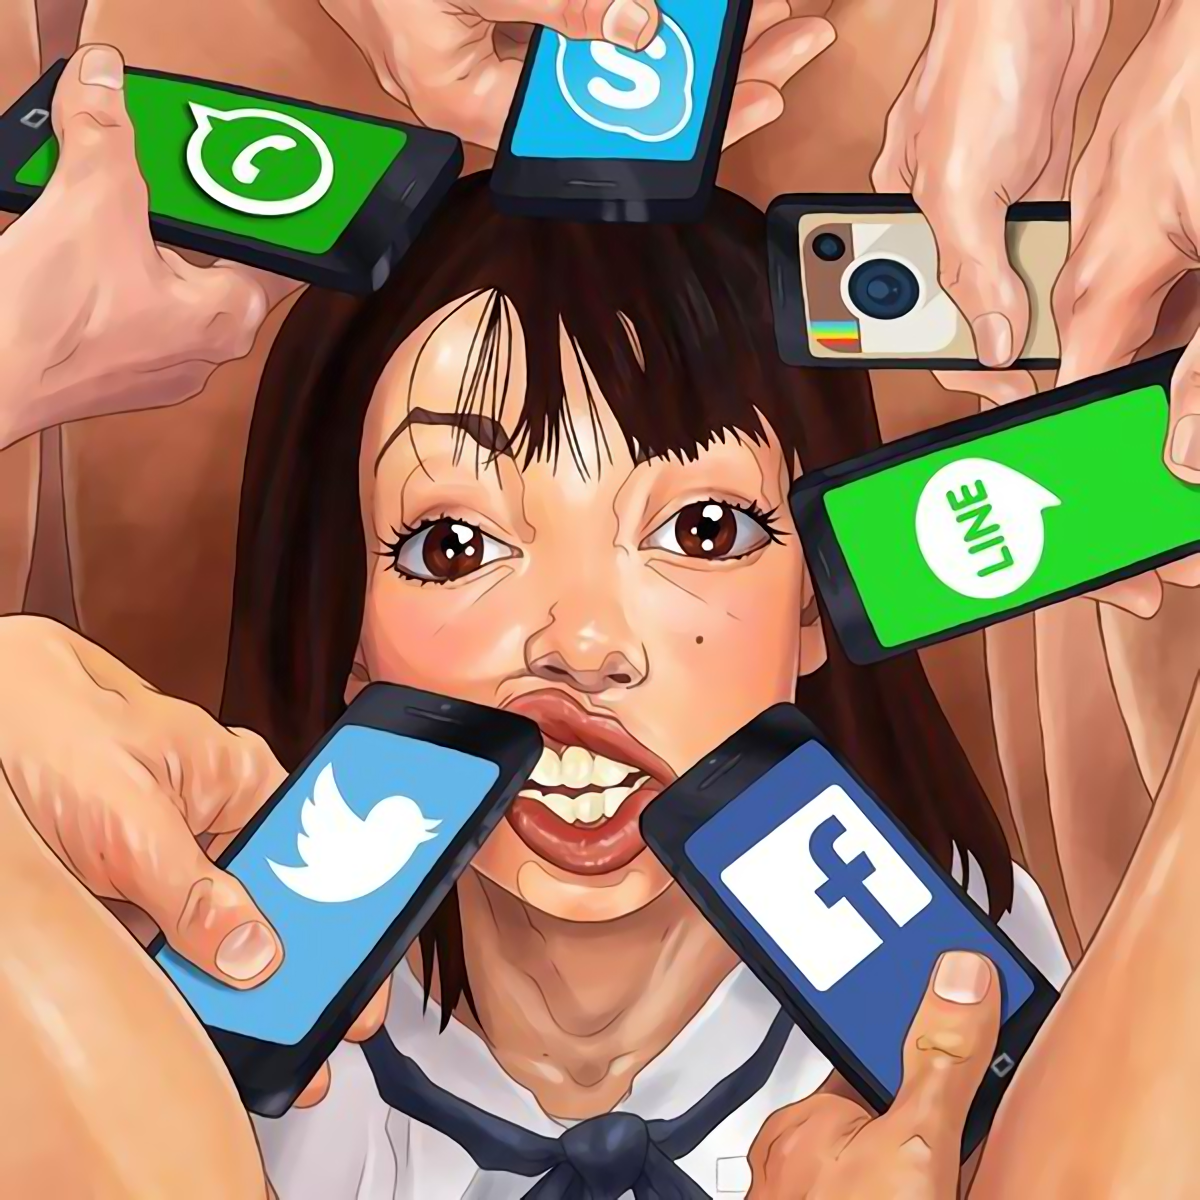 Anime 1200x1200 artwork anime girls anime social media face open mouth brunette women looking at viewer suggestive smartphone technology phallic symbol portrait application